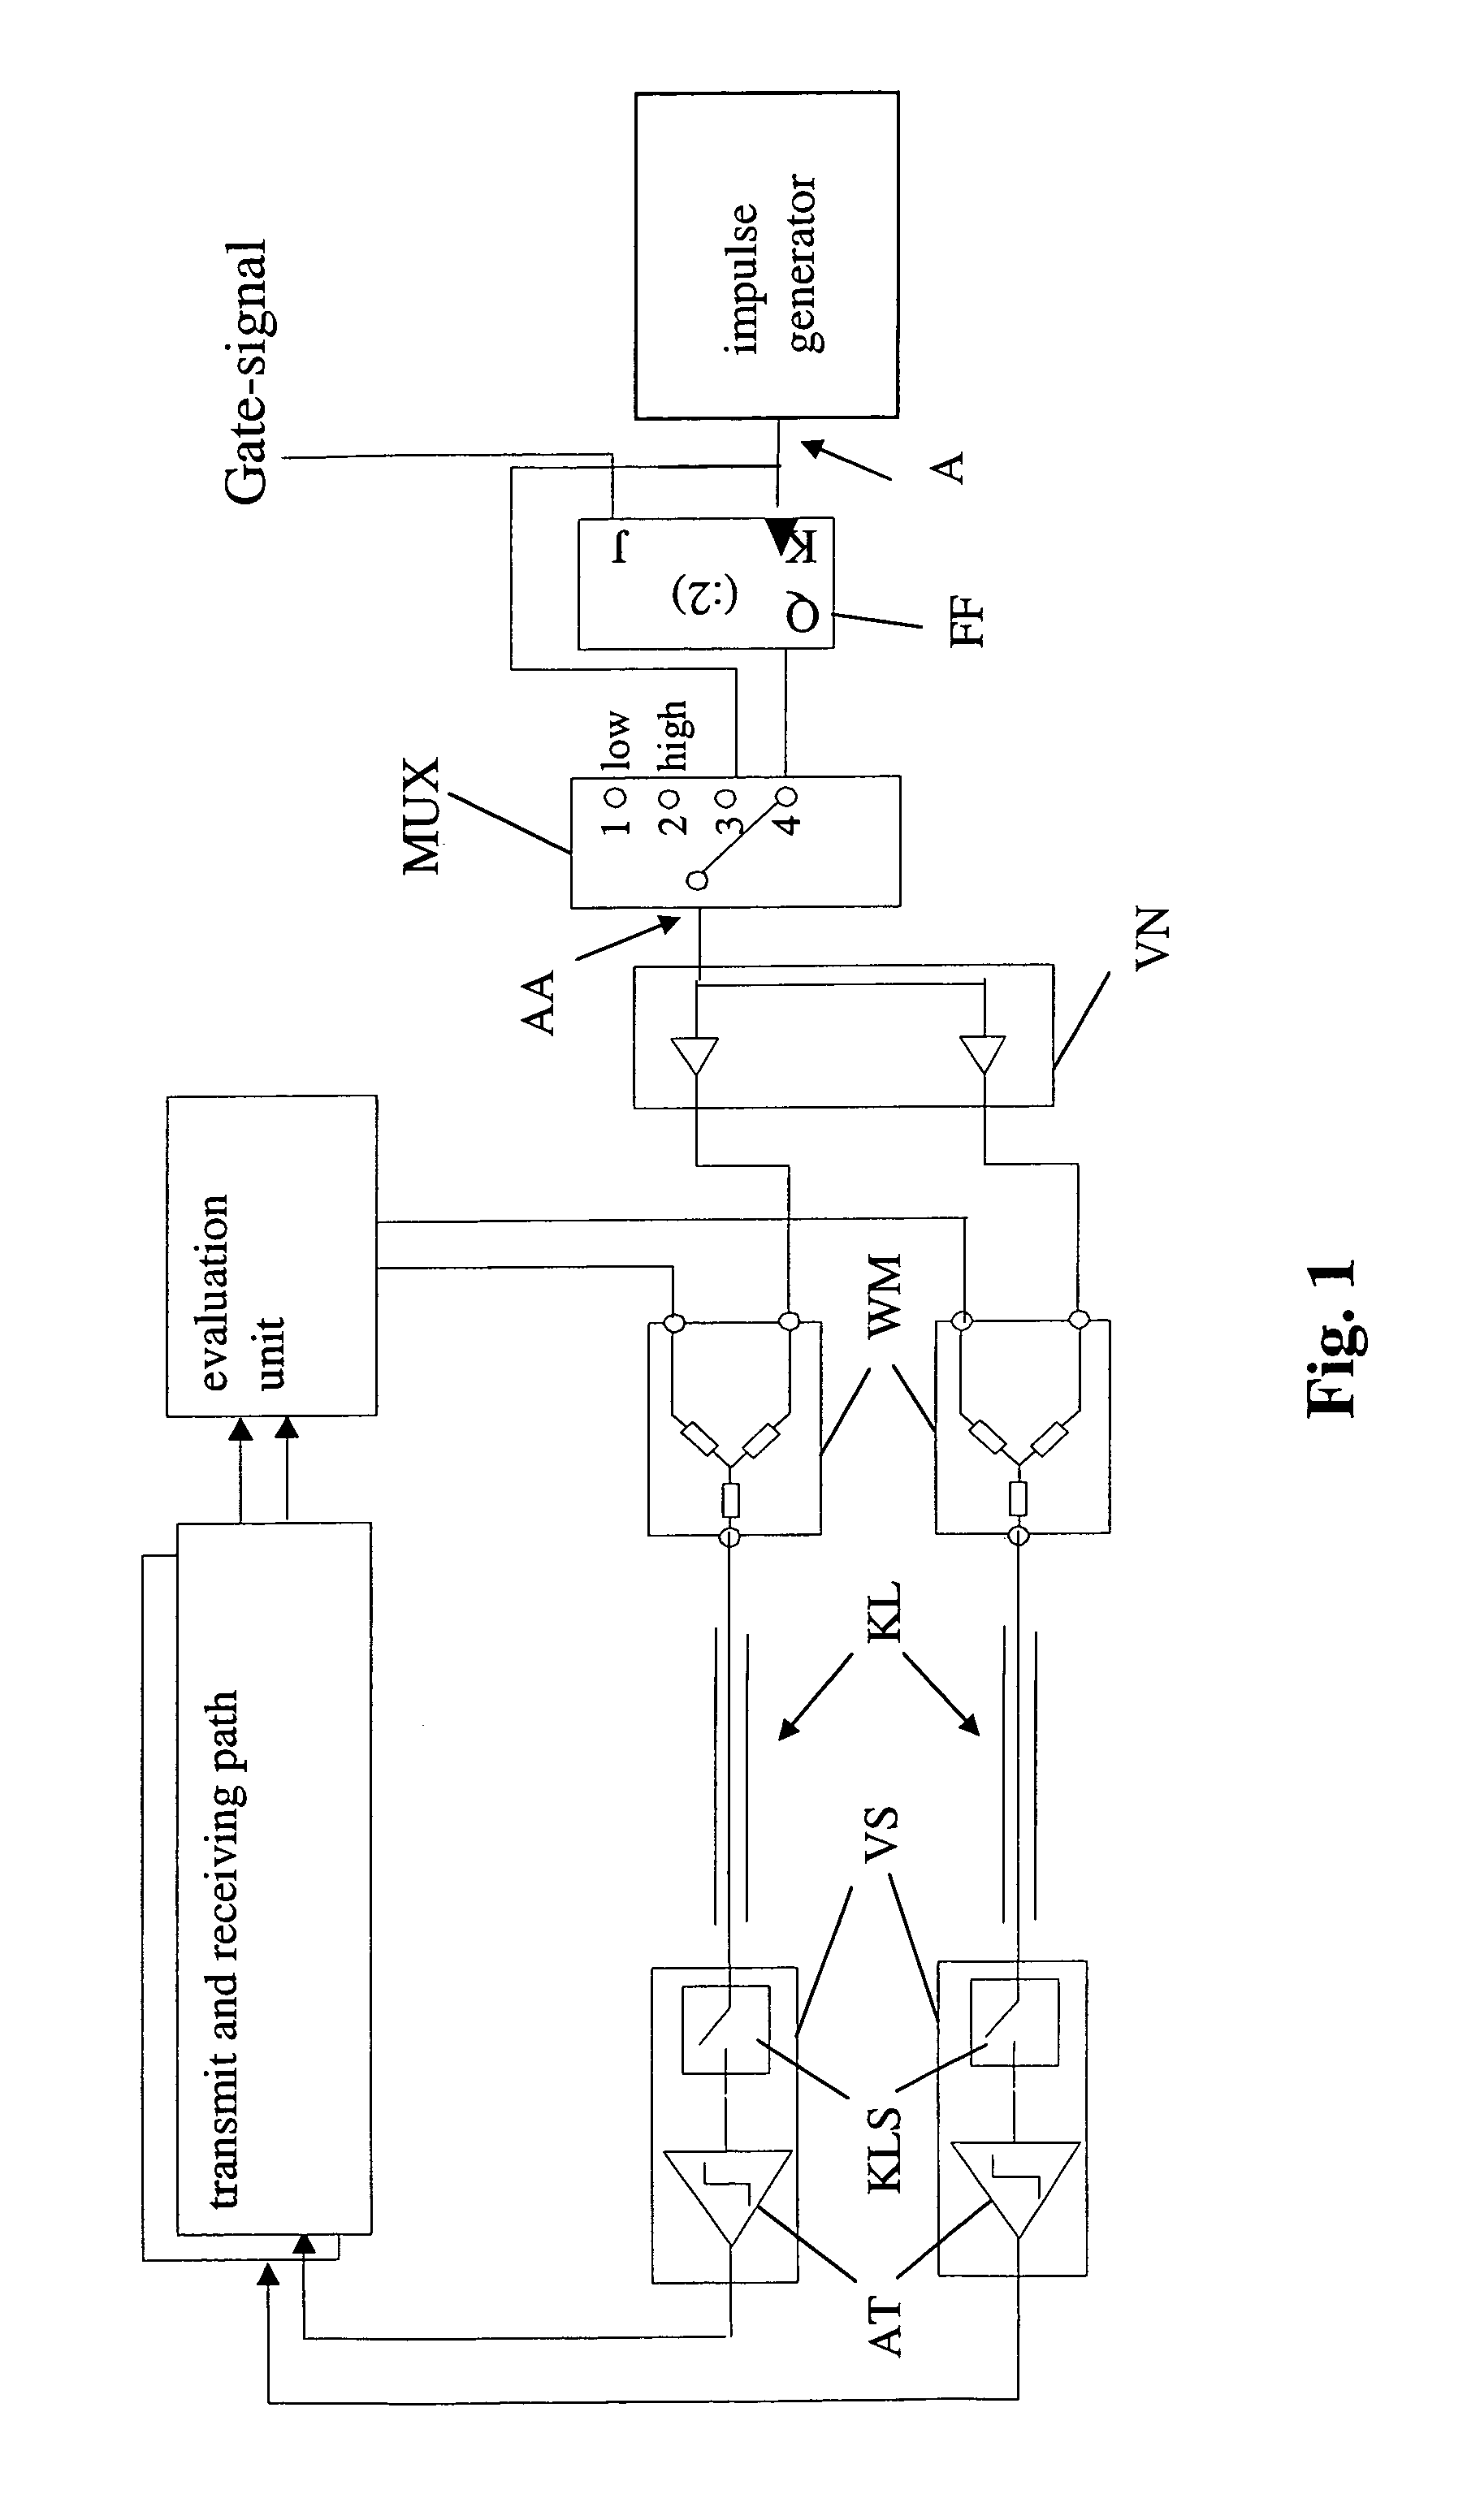 Method for generating calibration signals for calibrating spatially remote signal branches of antenna systems